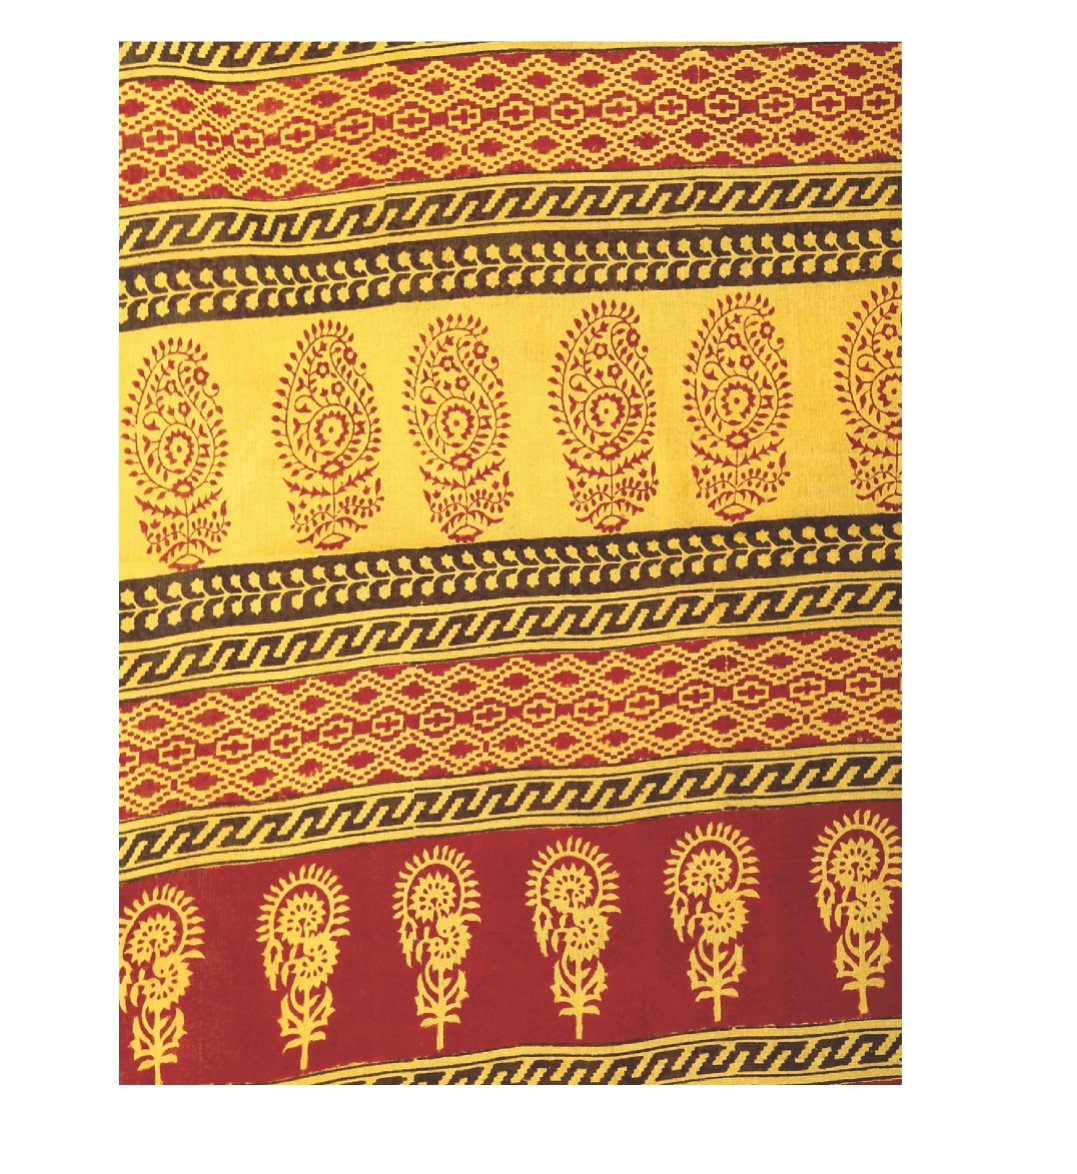 Yellow Cotton Hand Block Bagh Print Handcrafted Saree-Saree-Kalakari India-ZIBASA0037-Bagh, Cotton, Geographical Indication, Hand Blocks, Hand Crafted, Heritage Prints, Natural Dyes, Sarees, Sustainable Fabrics-[Linen,Ethnic,wear,Fashionista,Handloom,Handicraft,Indigo,blockprint,block,print,Cotton,Chanderi,Blue, latest,classy,party,bollywood,trendy,summer,style,traditional,formal,elegant,unique,style,hand,block,print, dabu,booti,gift,present,glamorous,affordable,collectible,Sari,Saree,printed, h